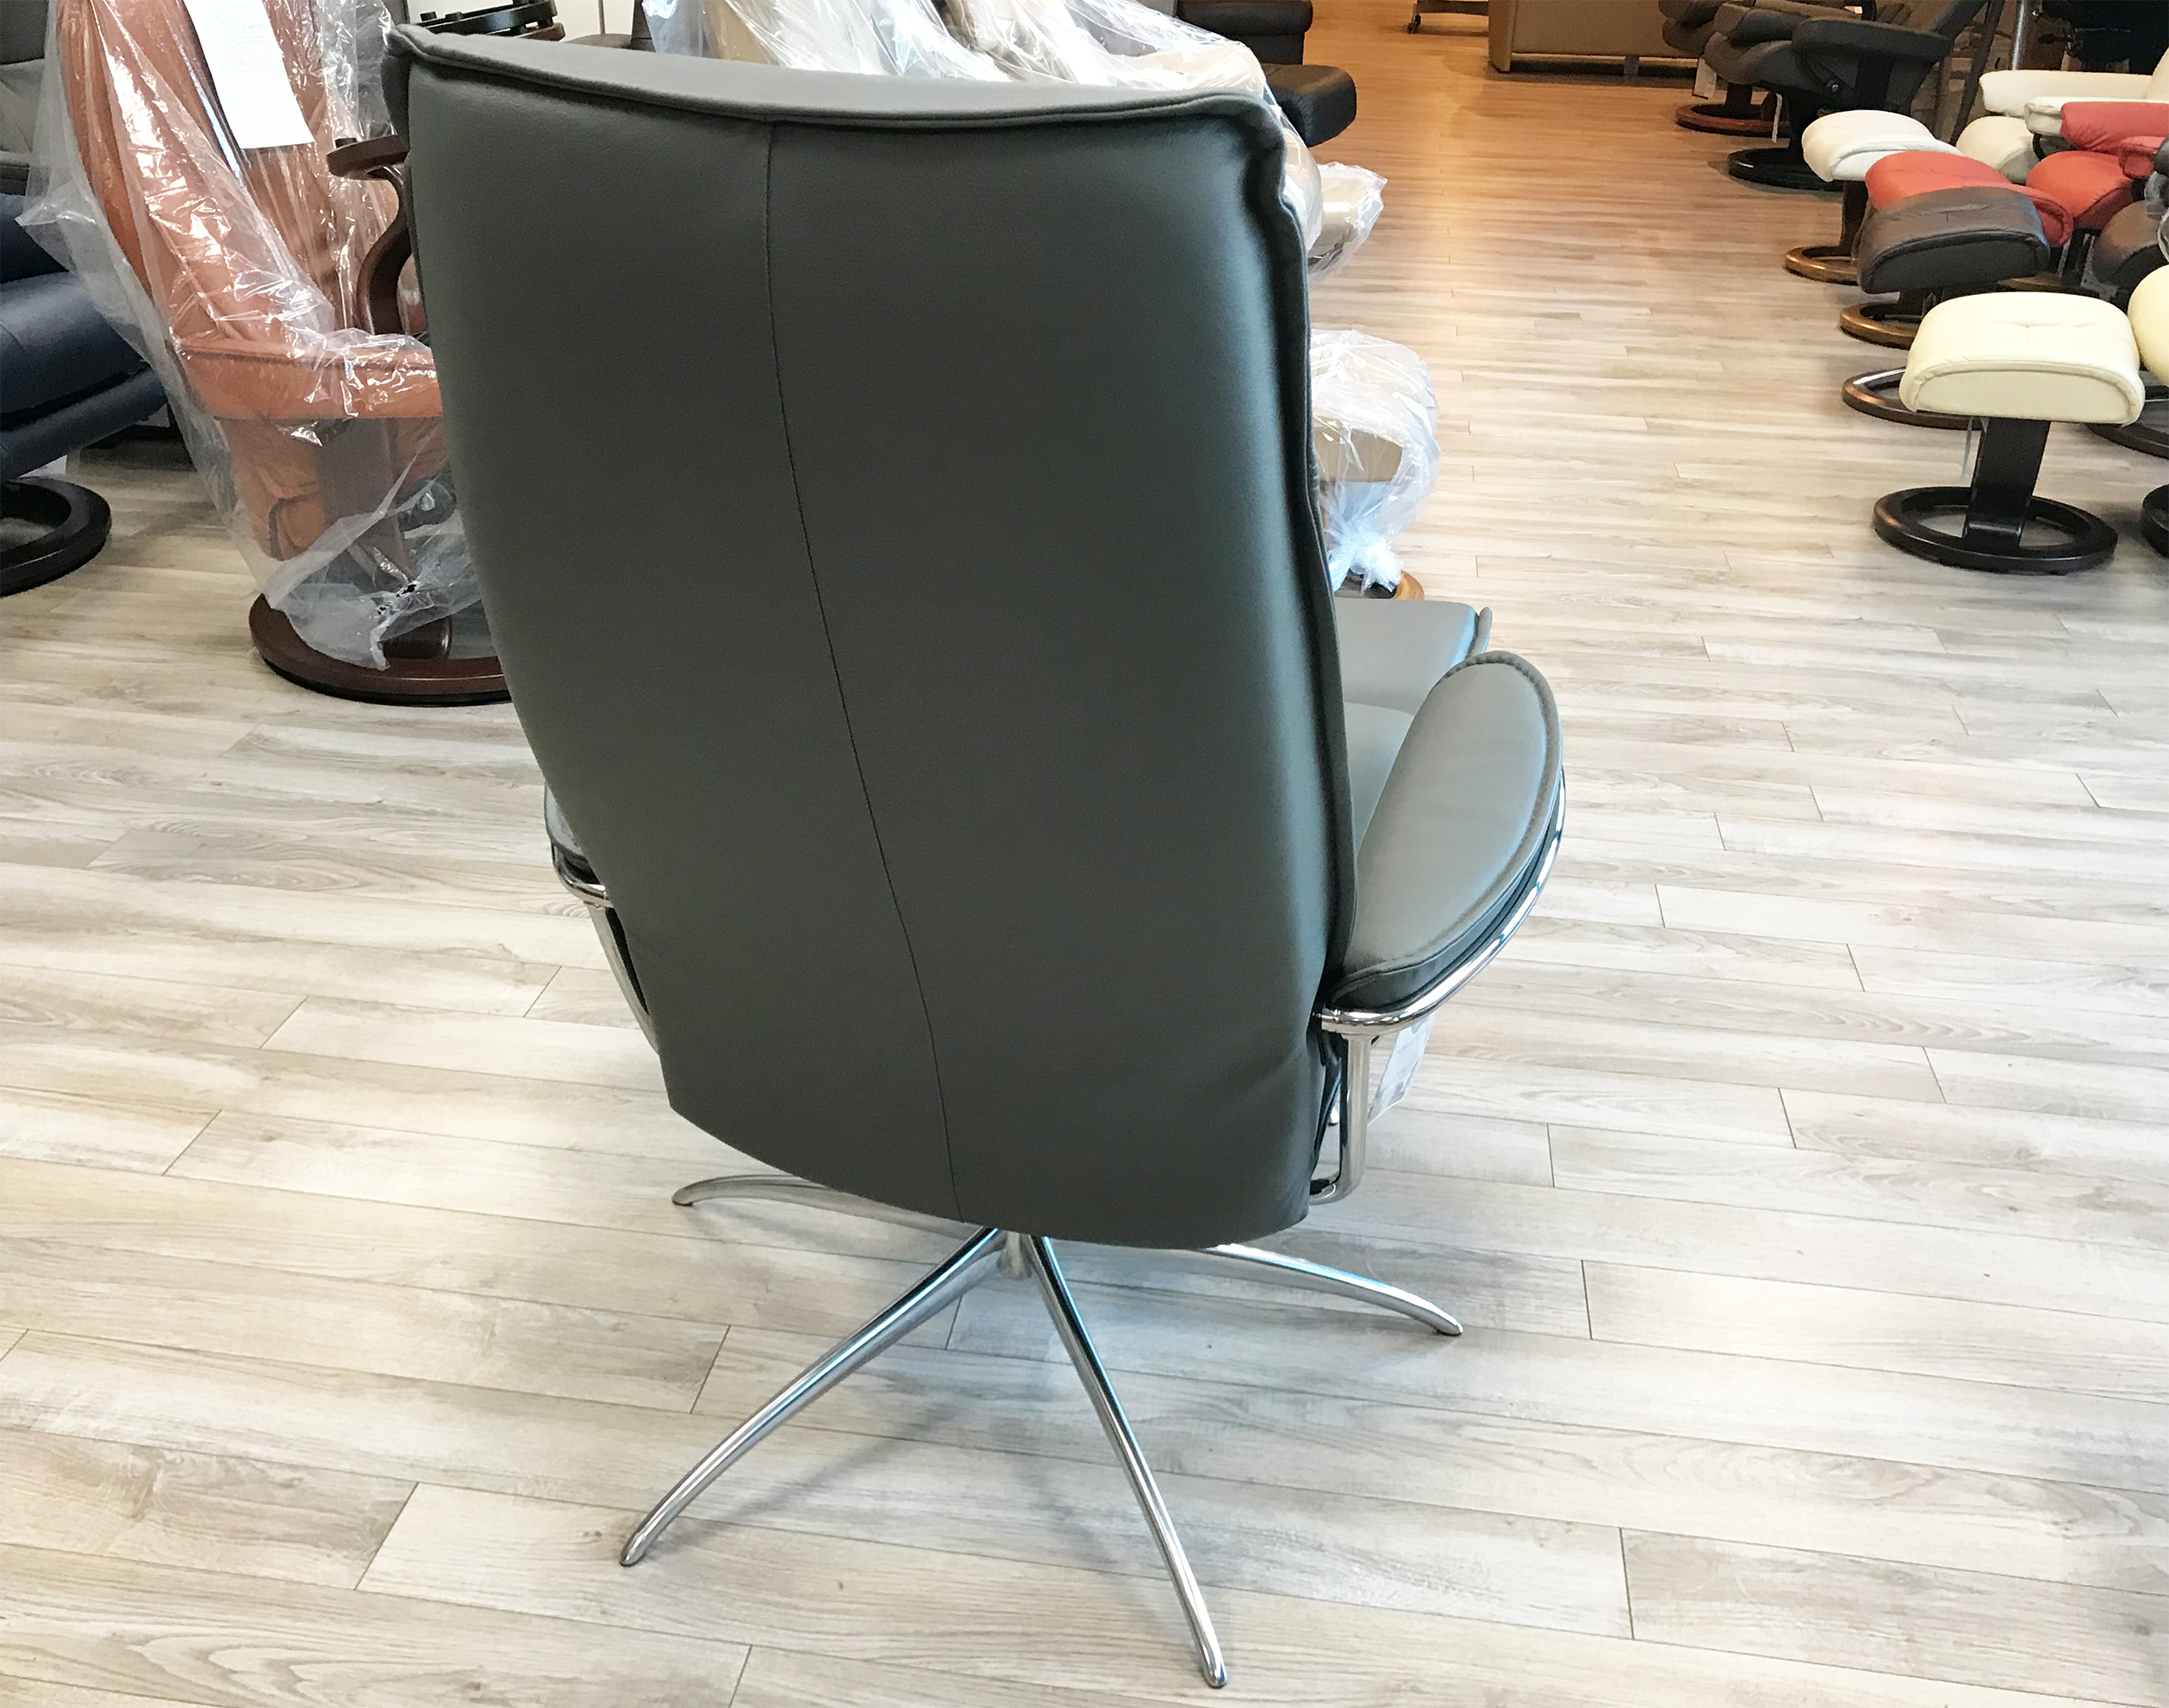 Stressless City High Back Leather Stressless Ekornes Recliners Batick Grey - Chairs City by Leather Back Grey High Batick